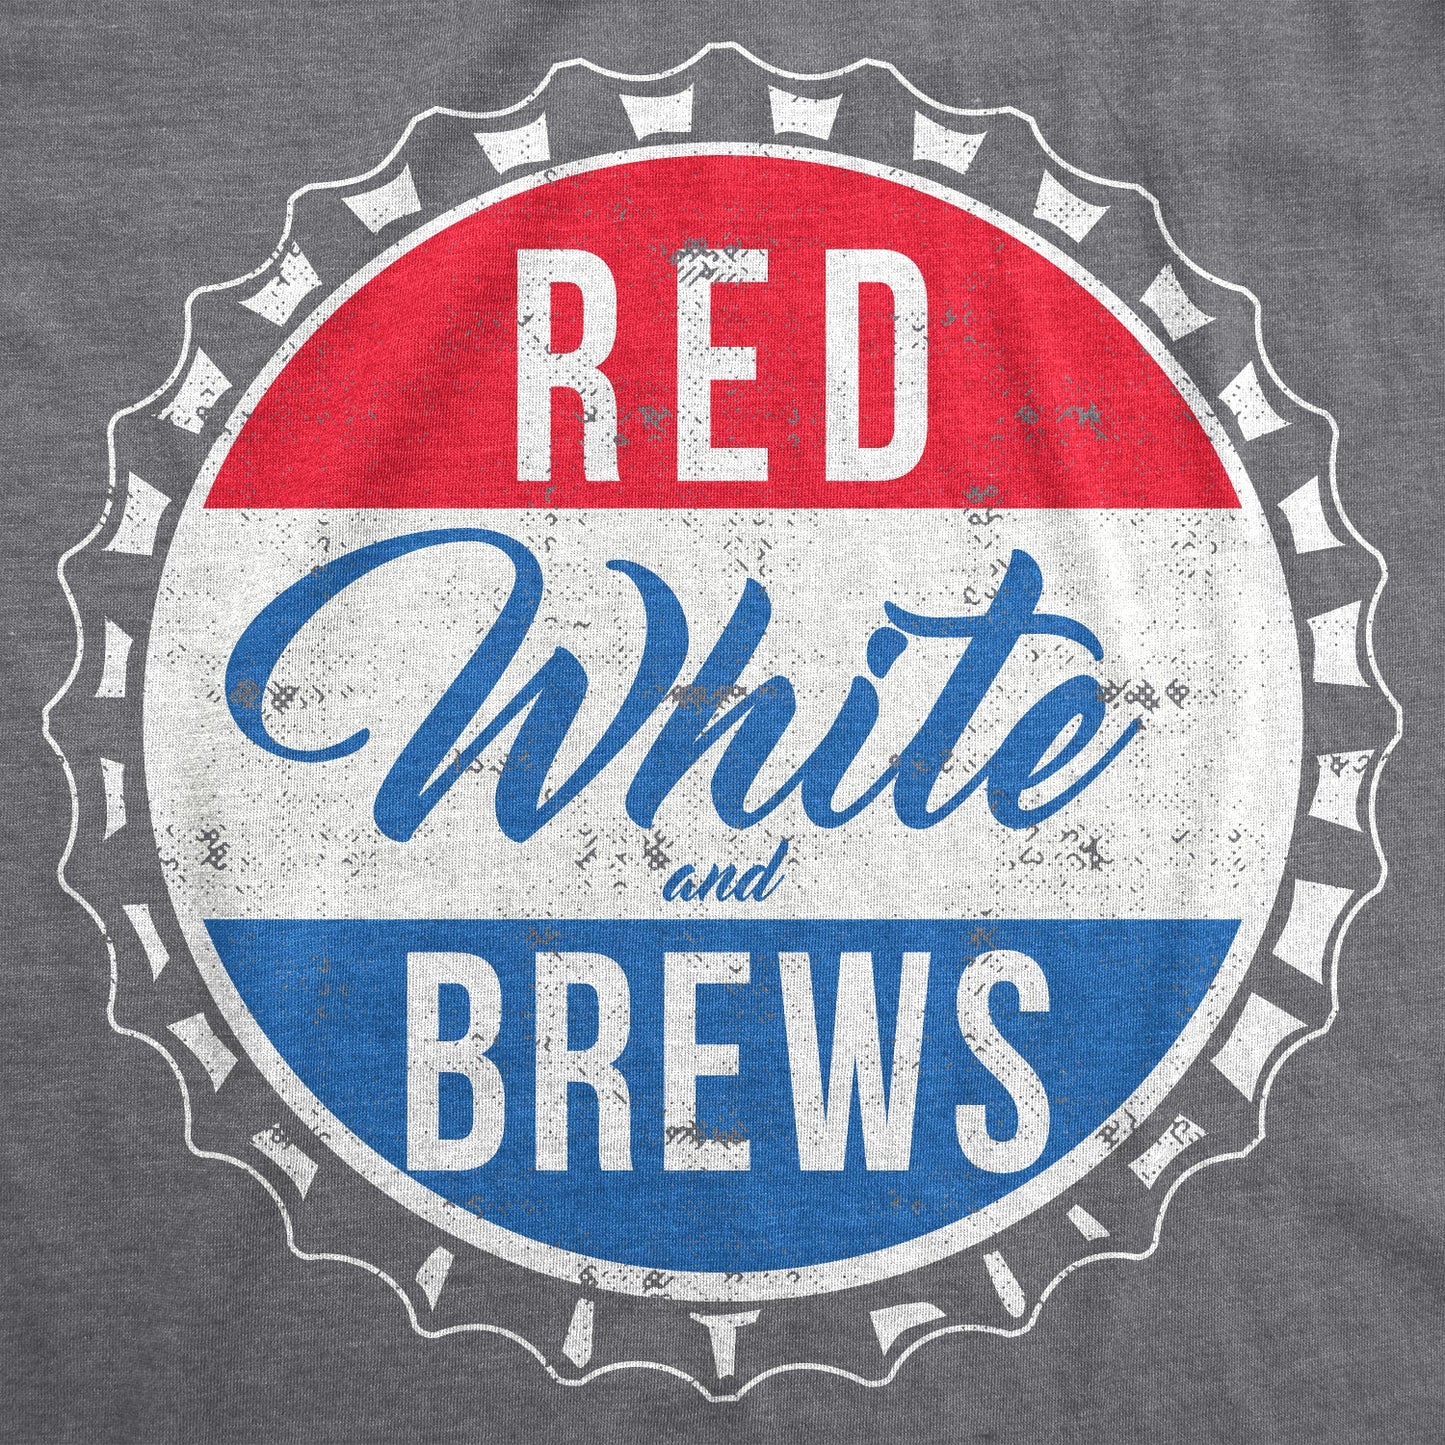 Red, White, and Brews Men's T-Shirt